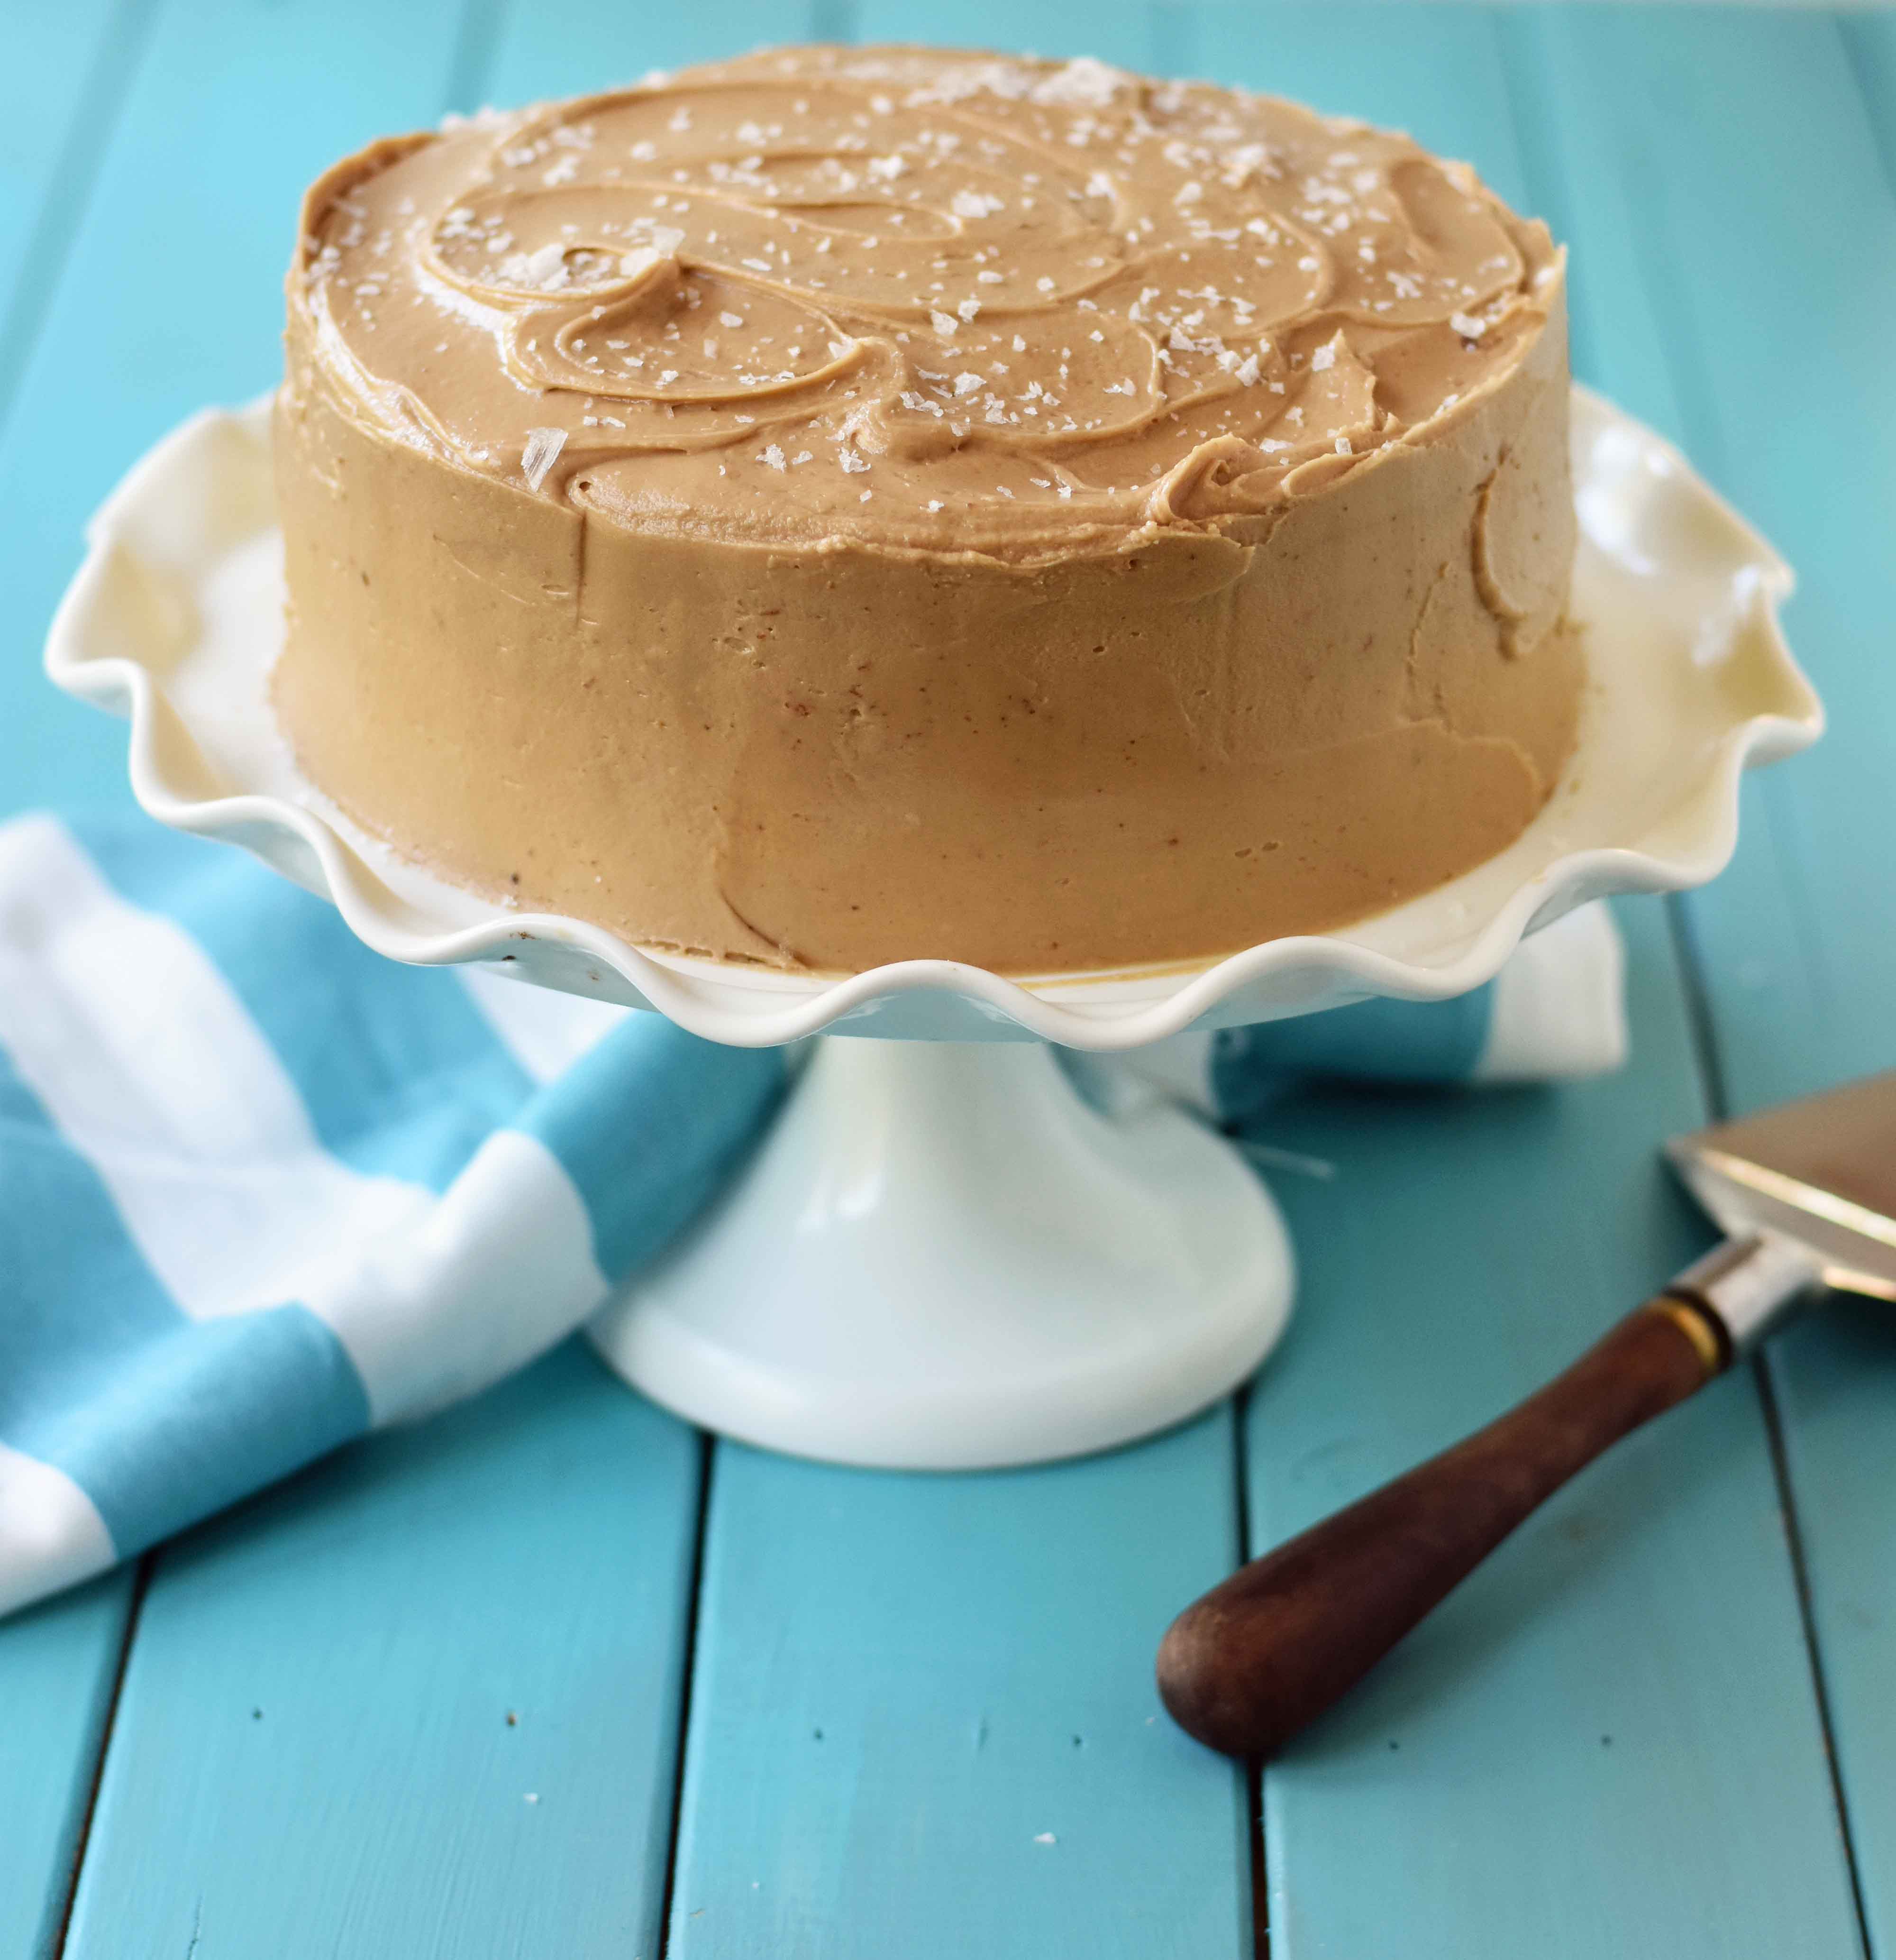 Southern Caramel Cake with Salted Caramel Frosting. A moist and fluffy yellow cake with sea salt caramel frosting. A Southern favorite cake! www.modernhoney.com